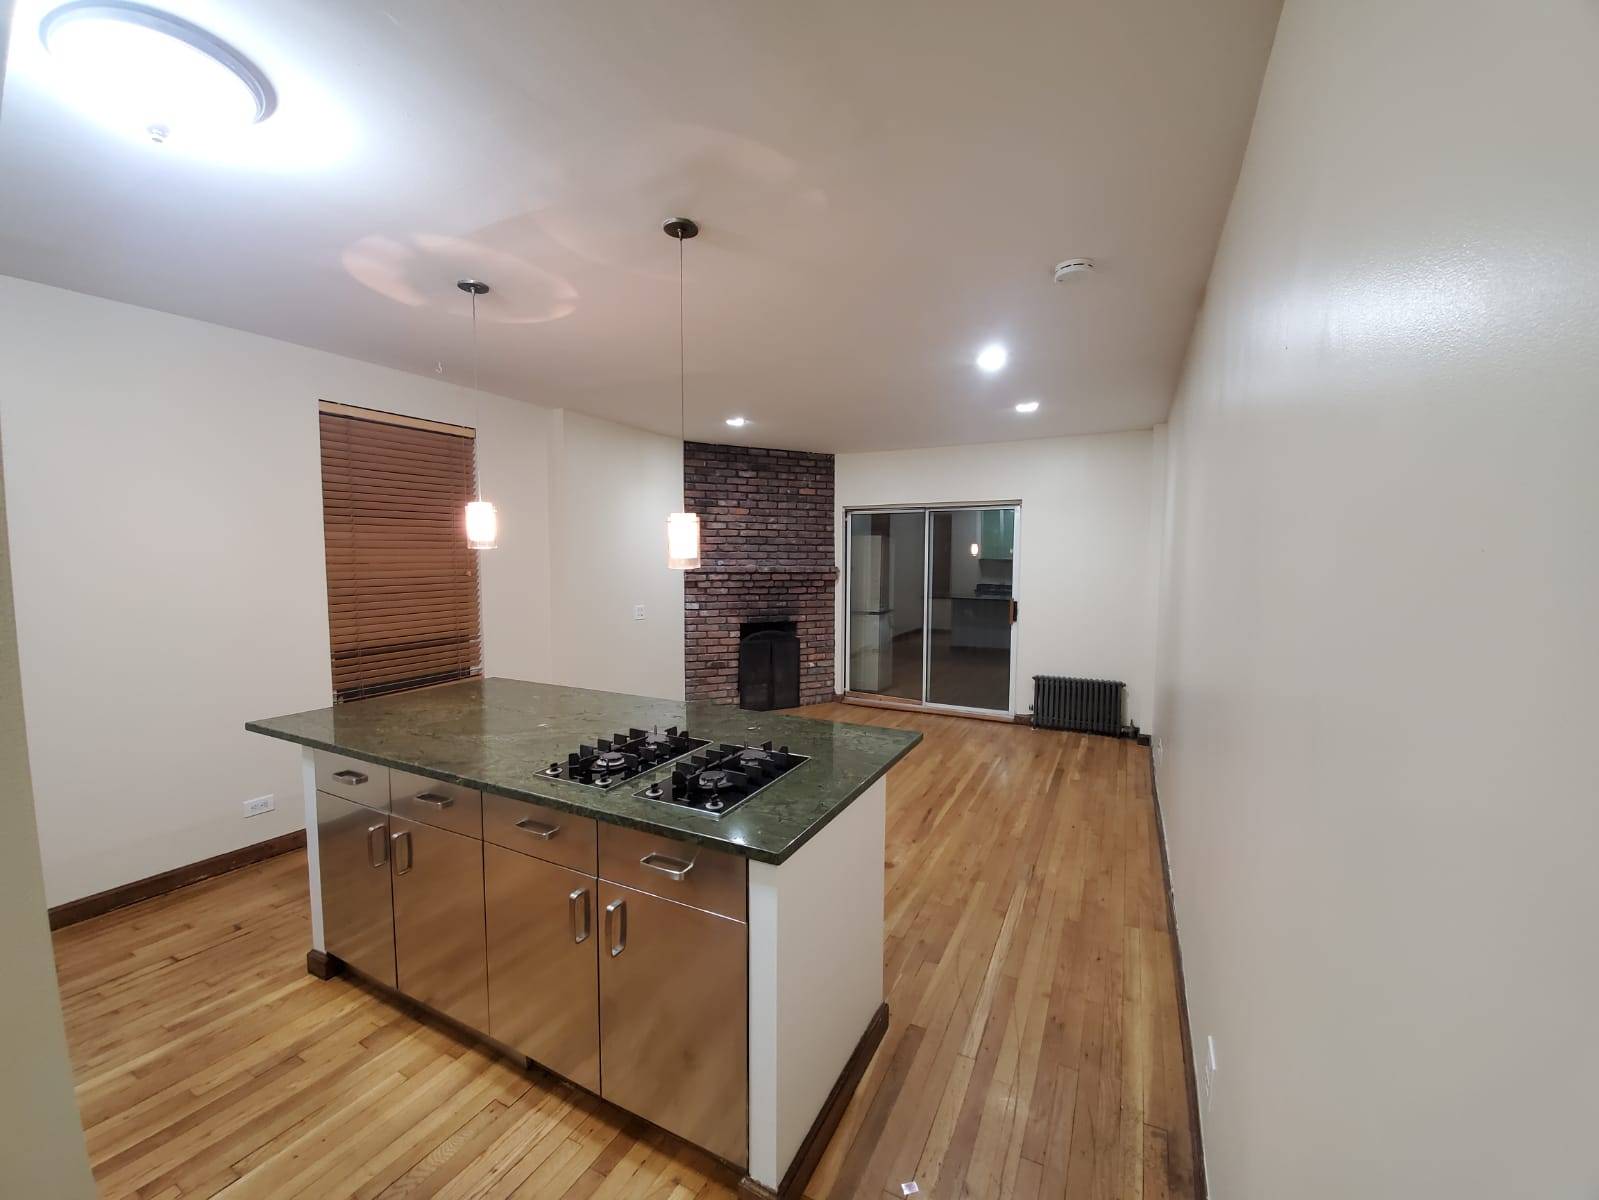 One of a kind studio apartment for rent in exciting Hudson Yards neighborhood !